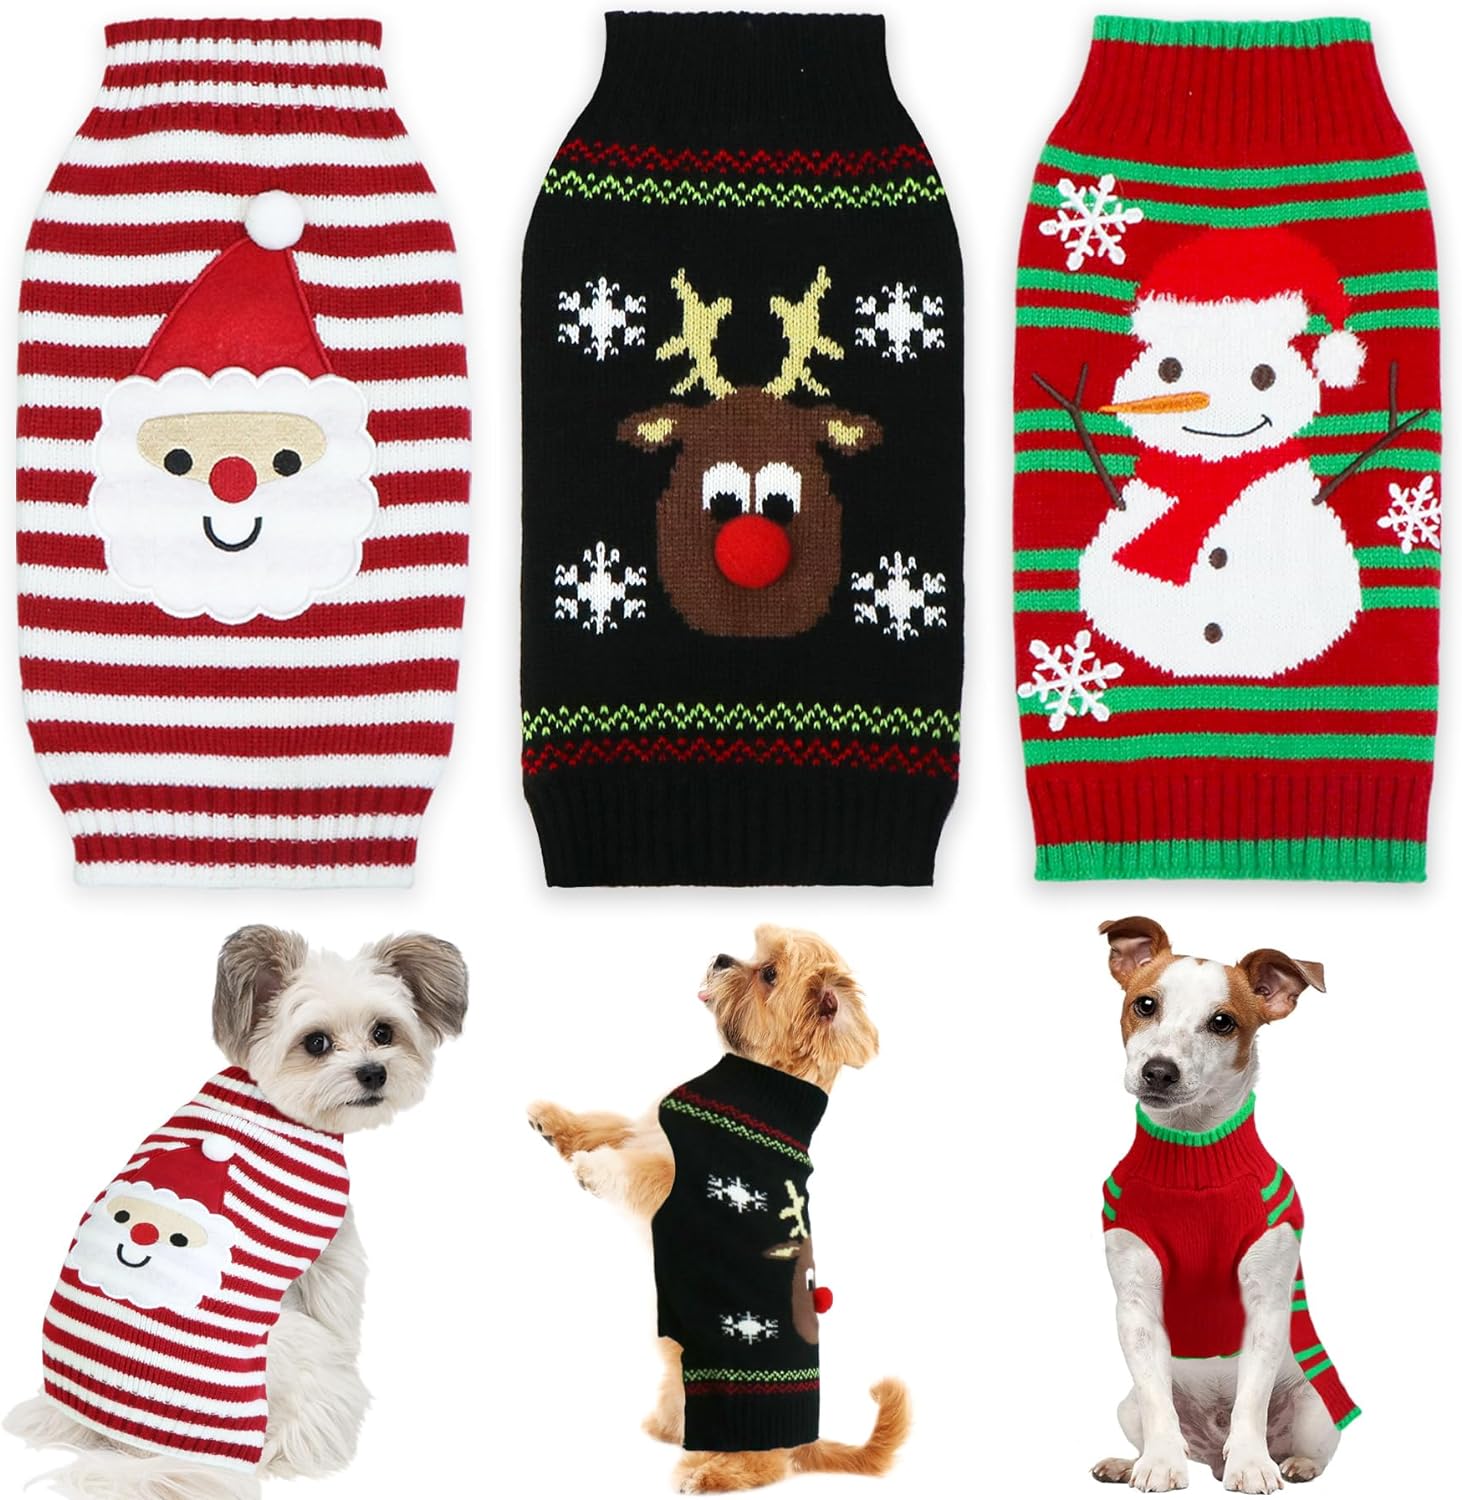 3 Pack Dog Christmas Sweater, GOYOSWA Dog Christmas Outfit Dog Holiday Sweater Santa Reindeer Snowman Knitted Sweaters for Small Medium Large Dogs Pets (Medium)